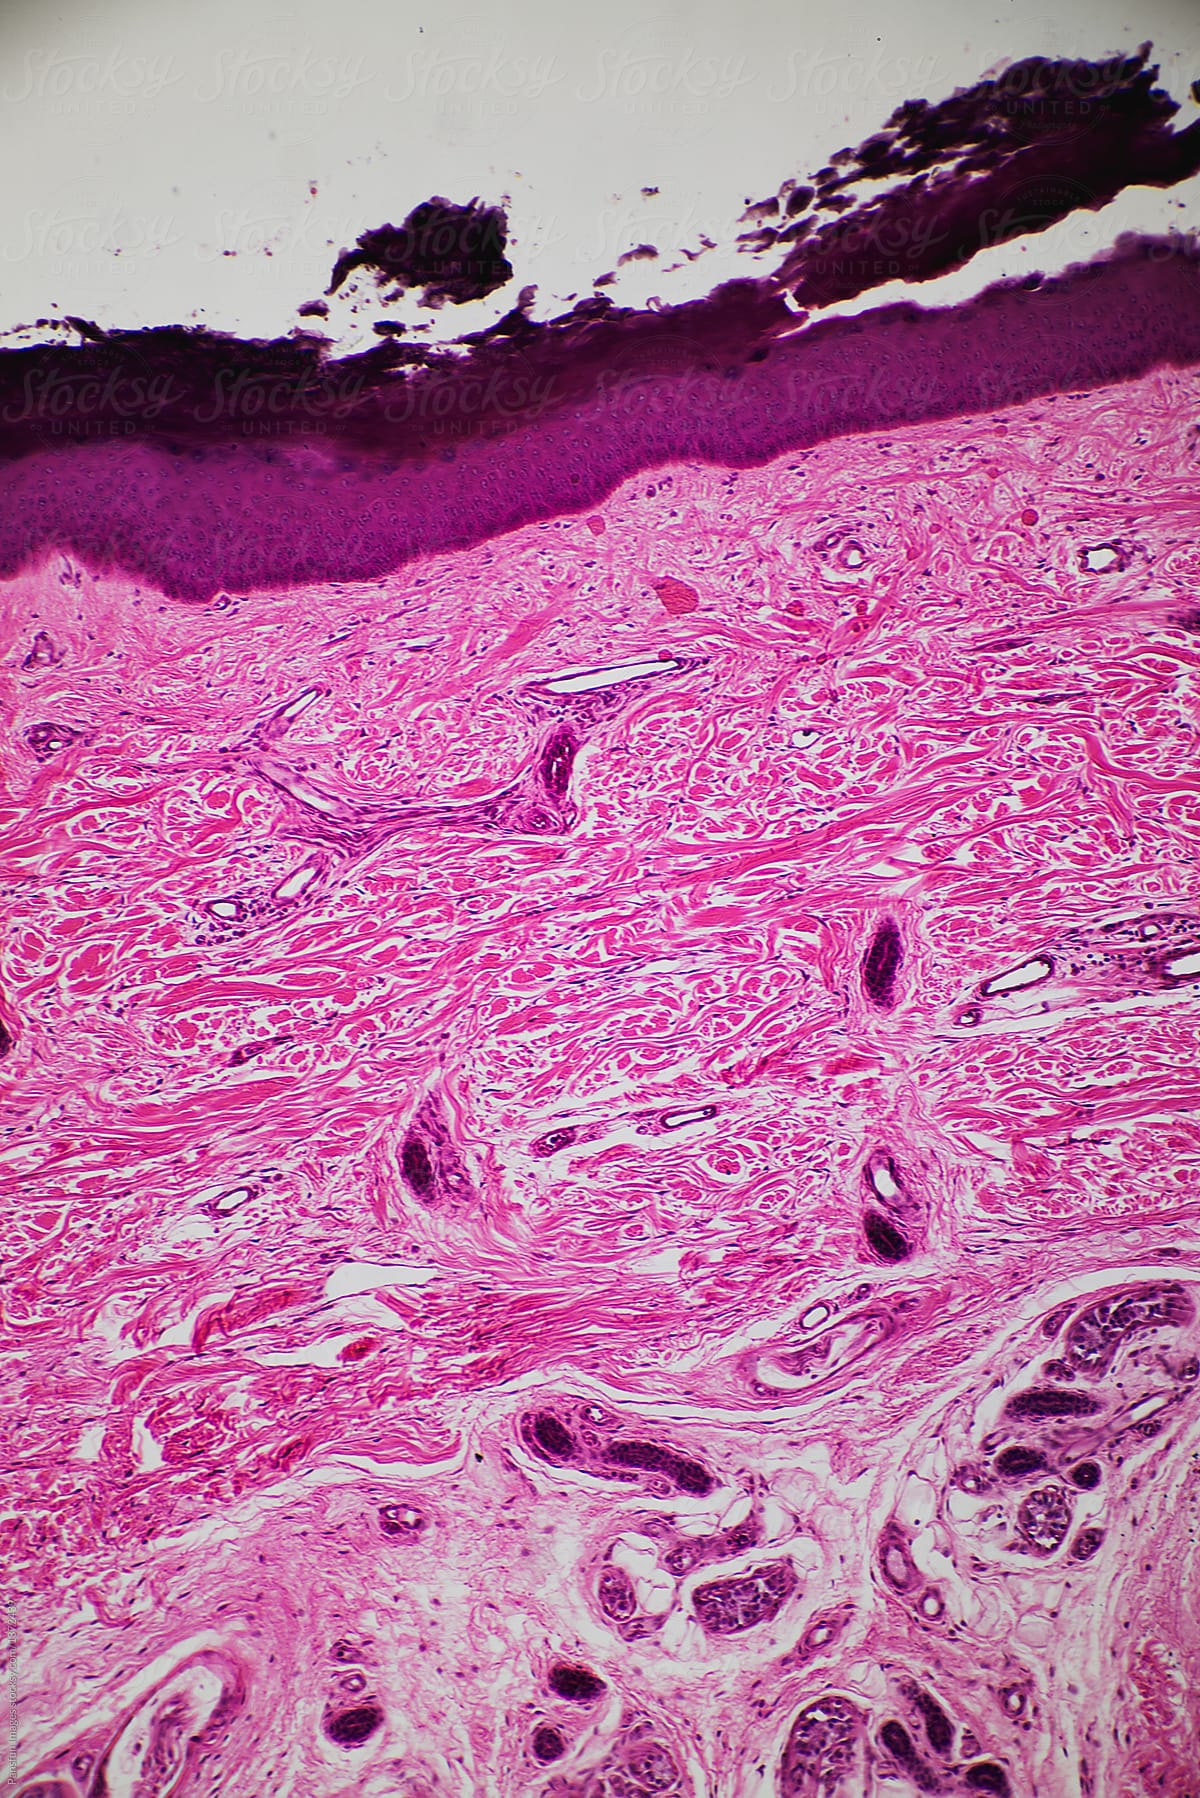 Thick layer cells of human skin